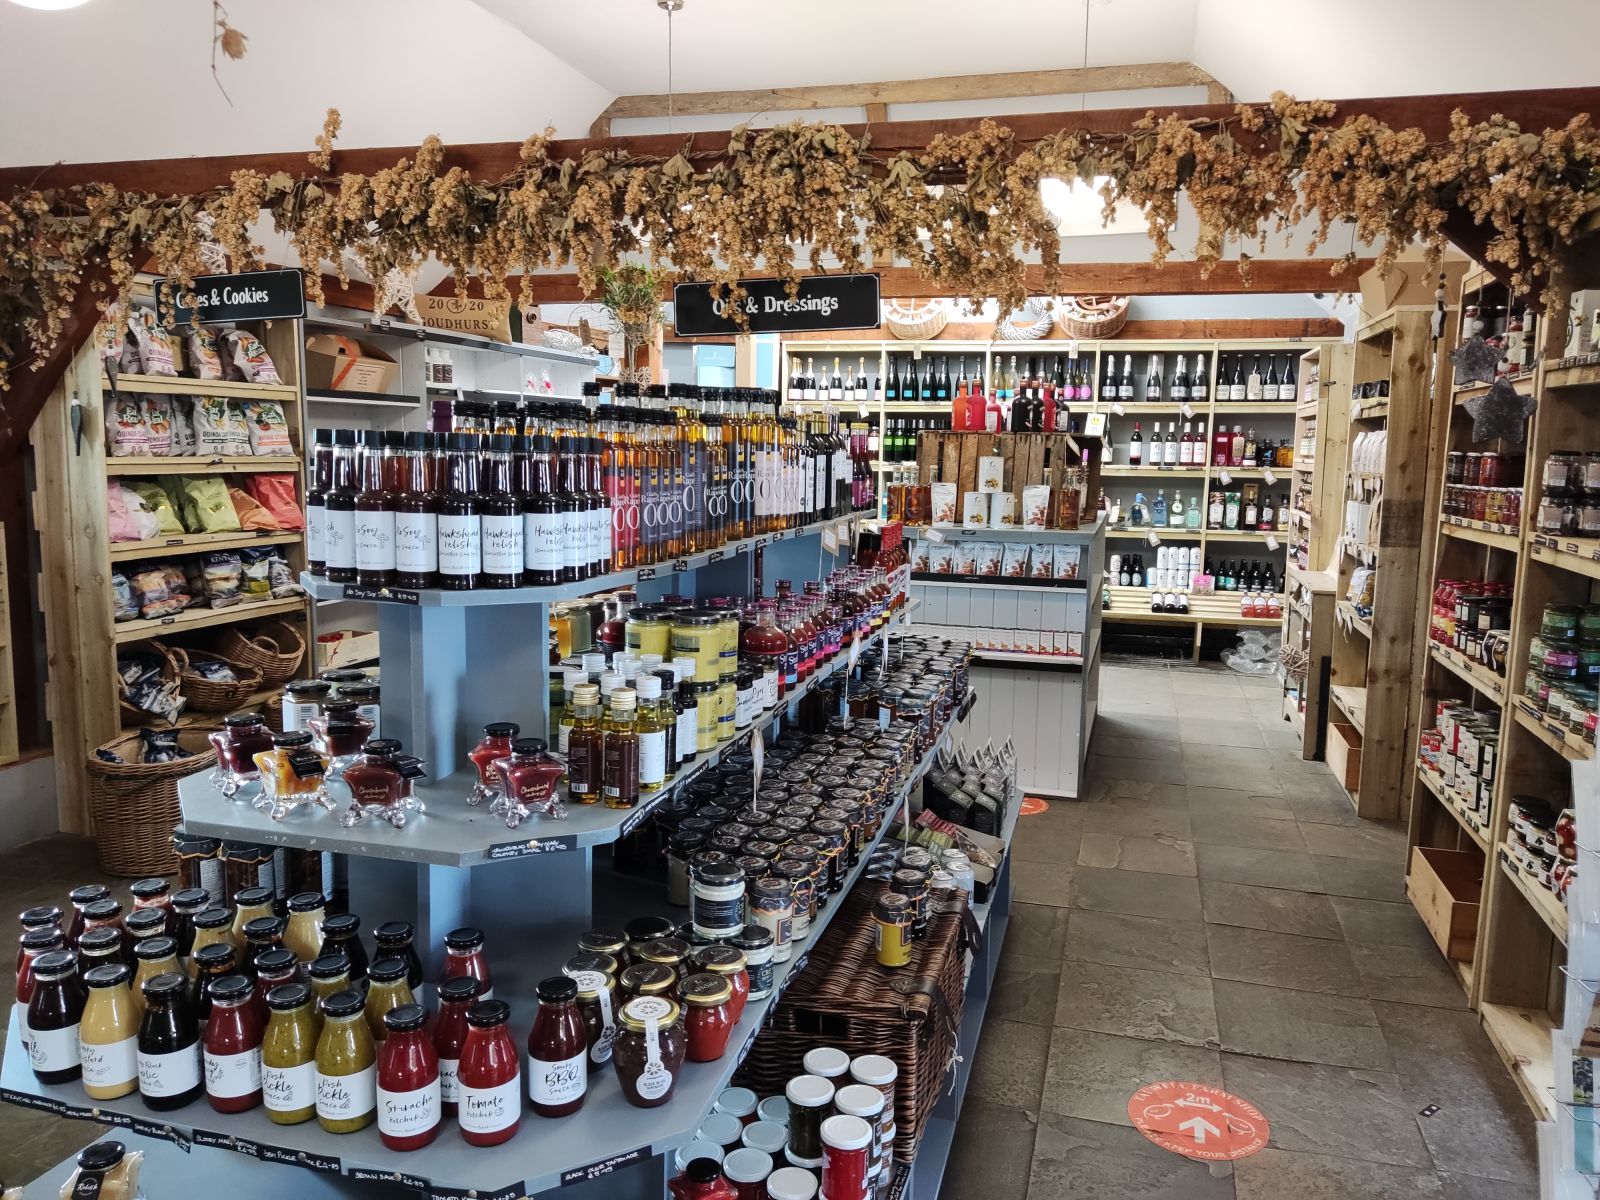 Taywell Farm Shop on the road to Goudhurst